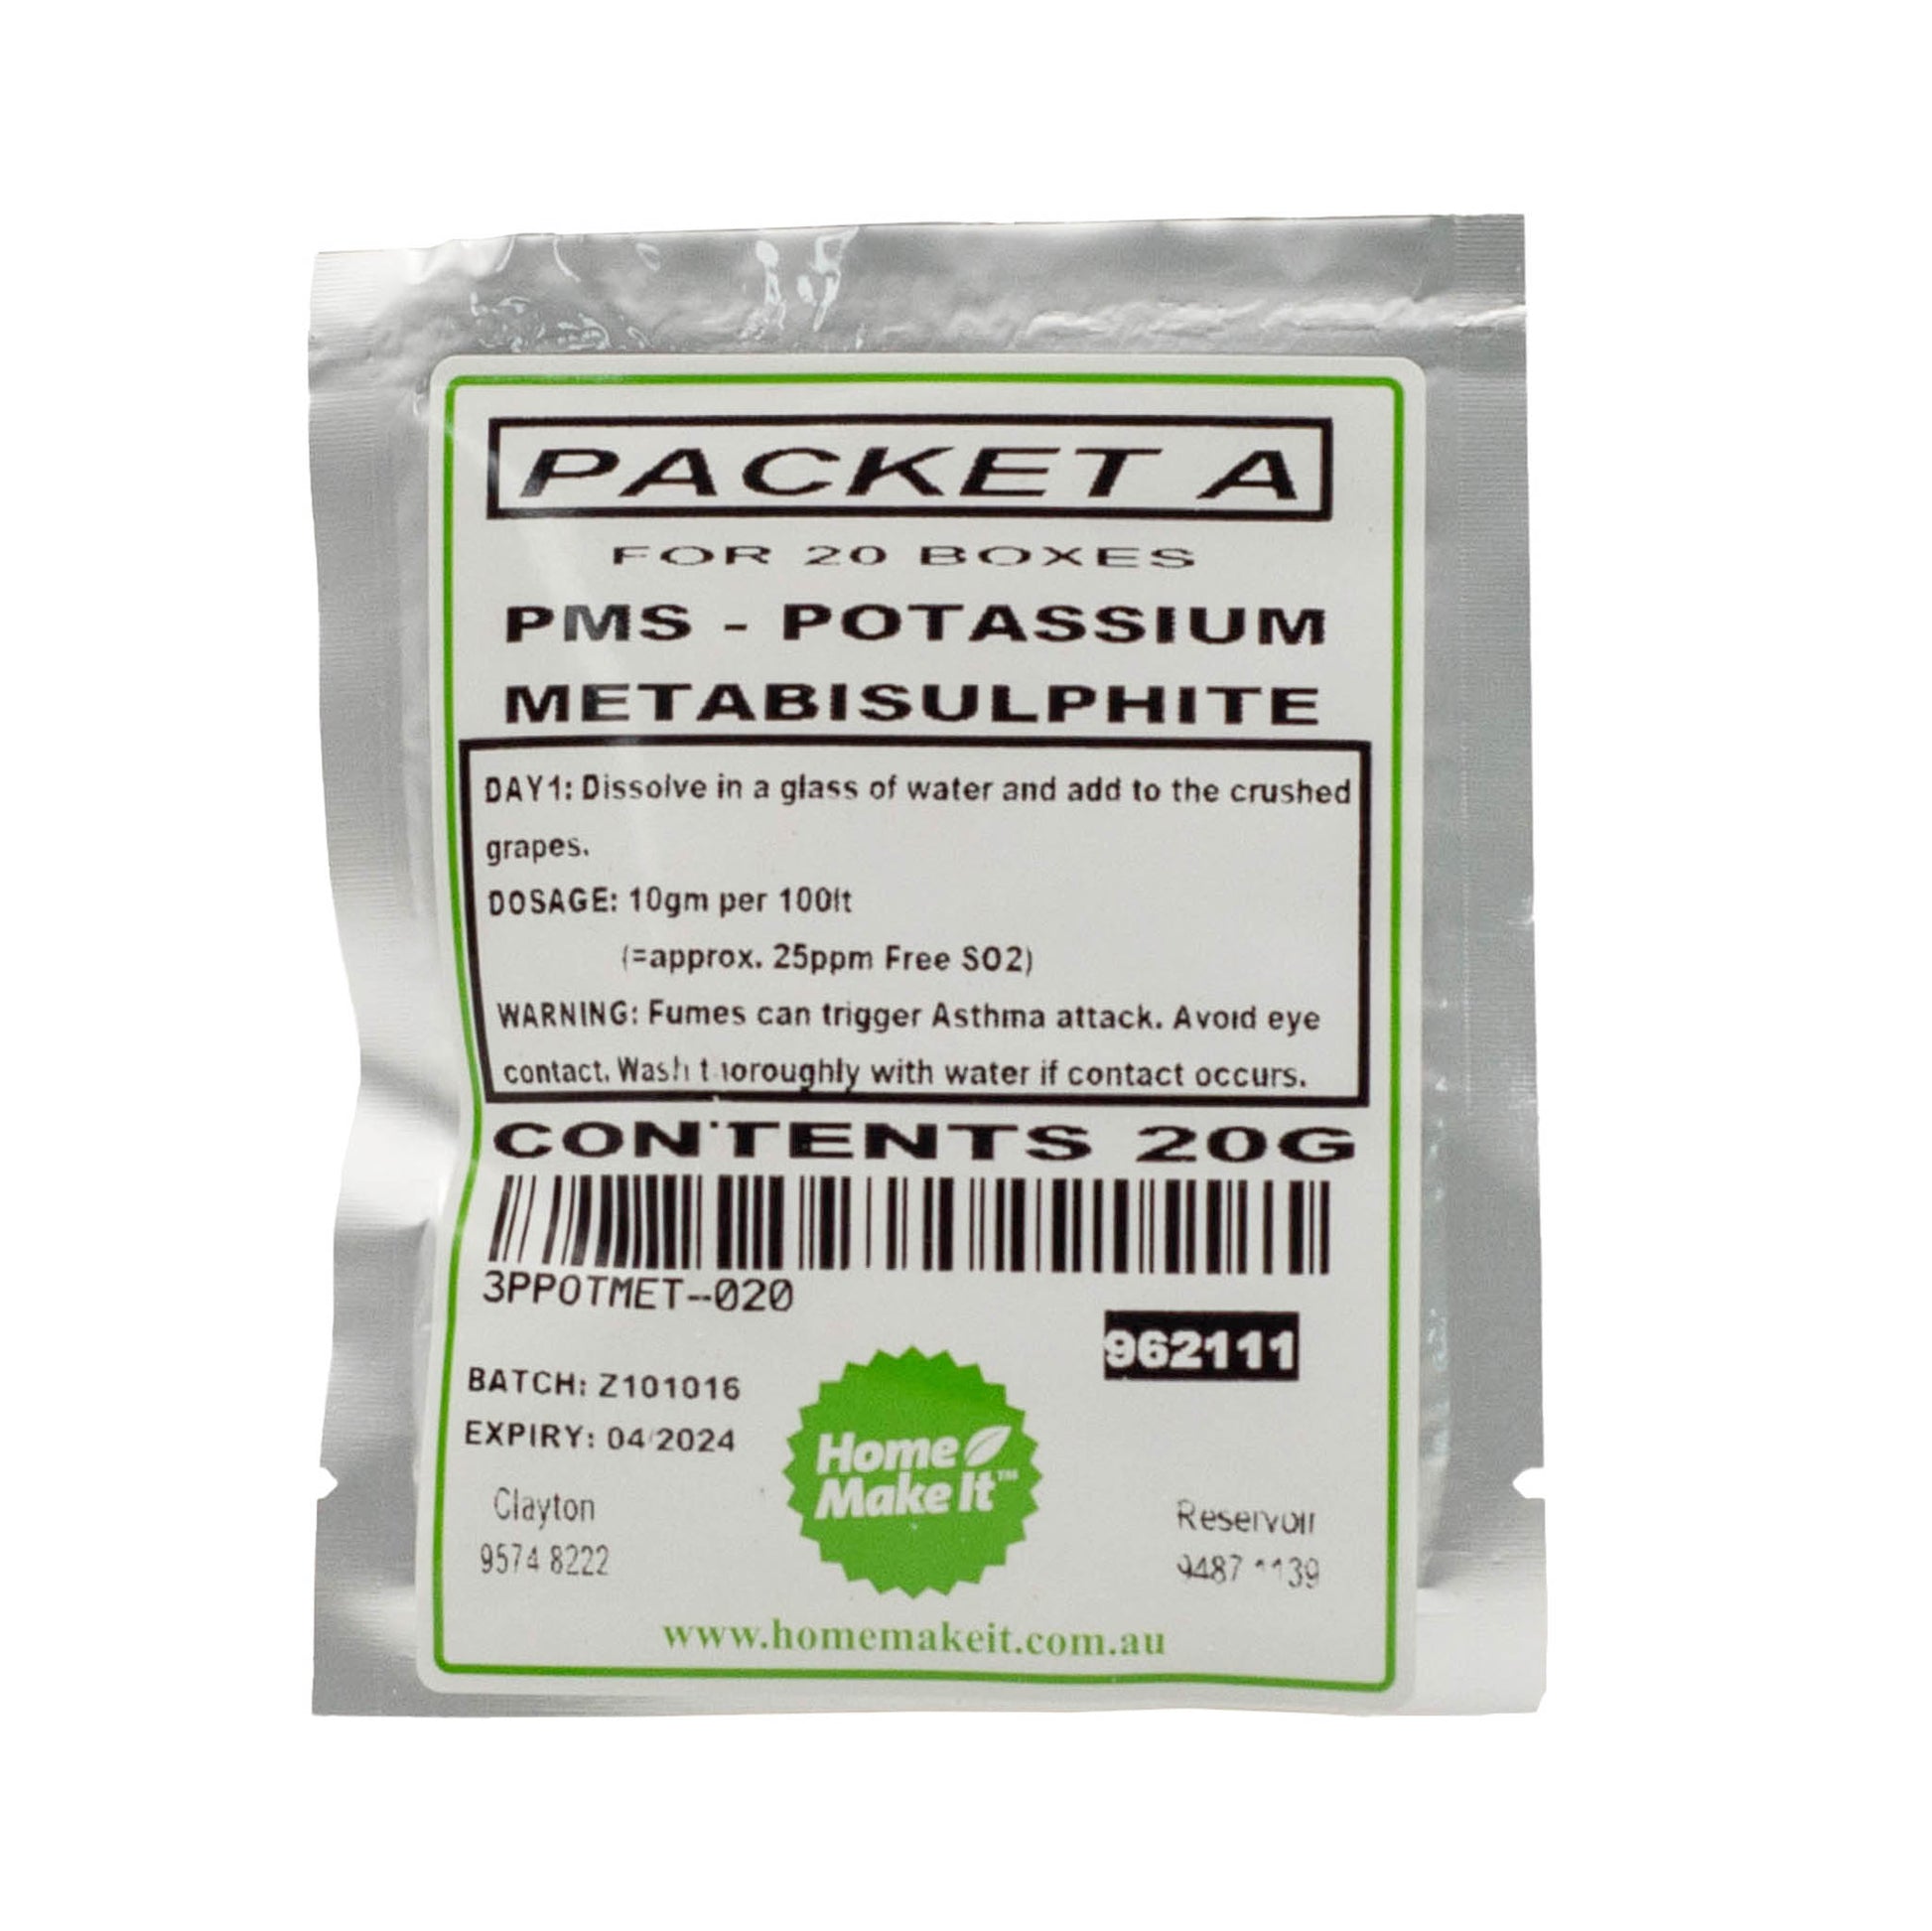 20g packet of potassium metabisulphite (PMS) or Packet A. Add to crushed grapes during the wine making process. 